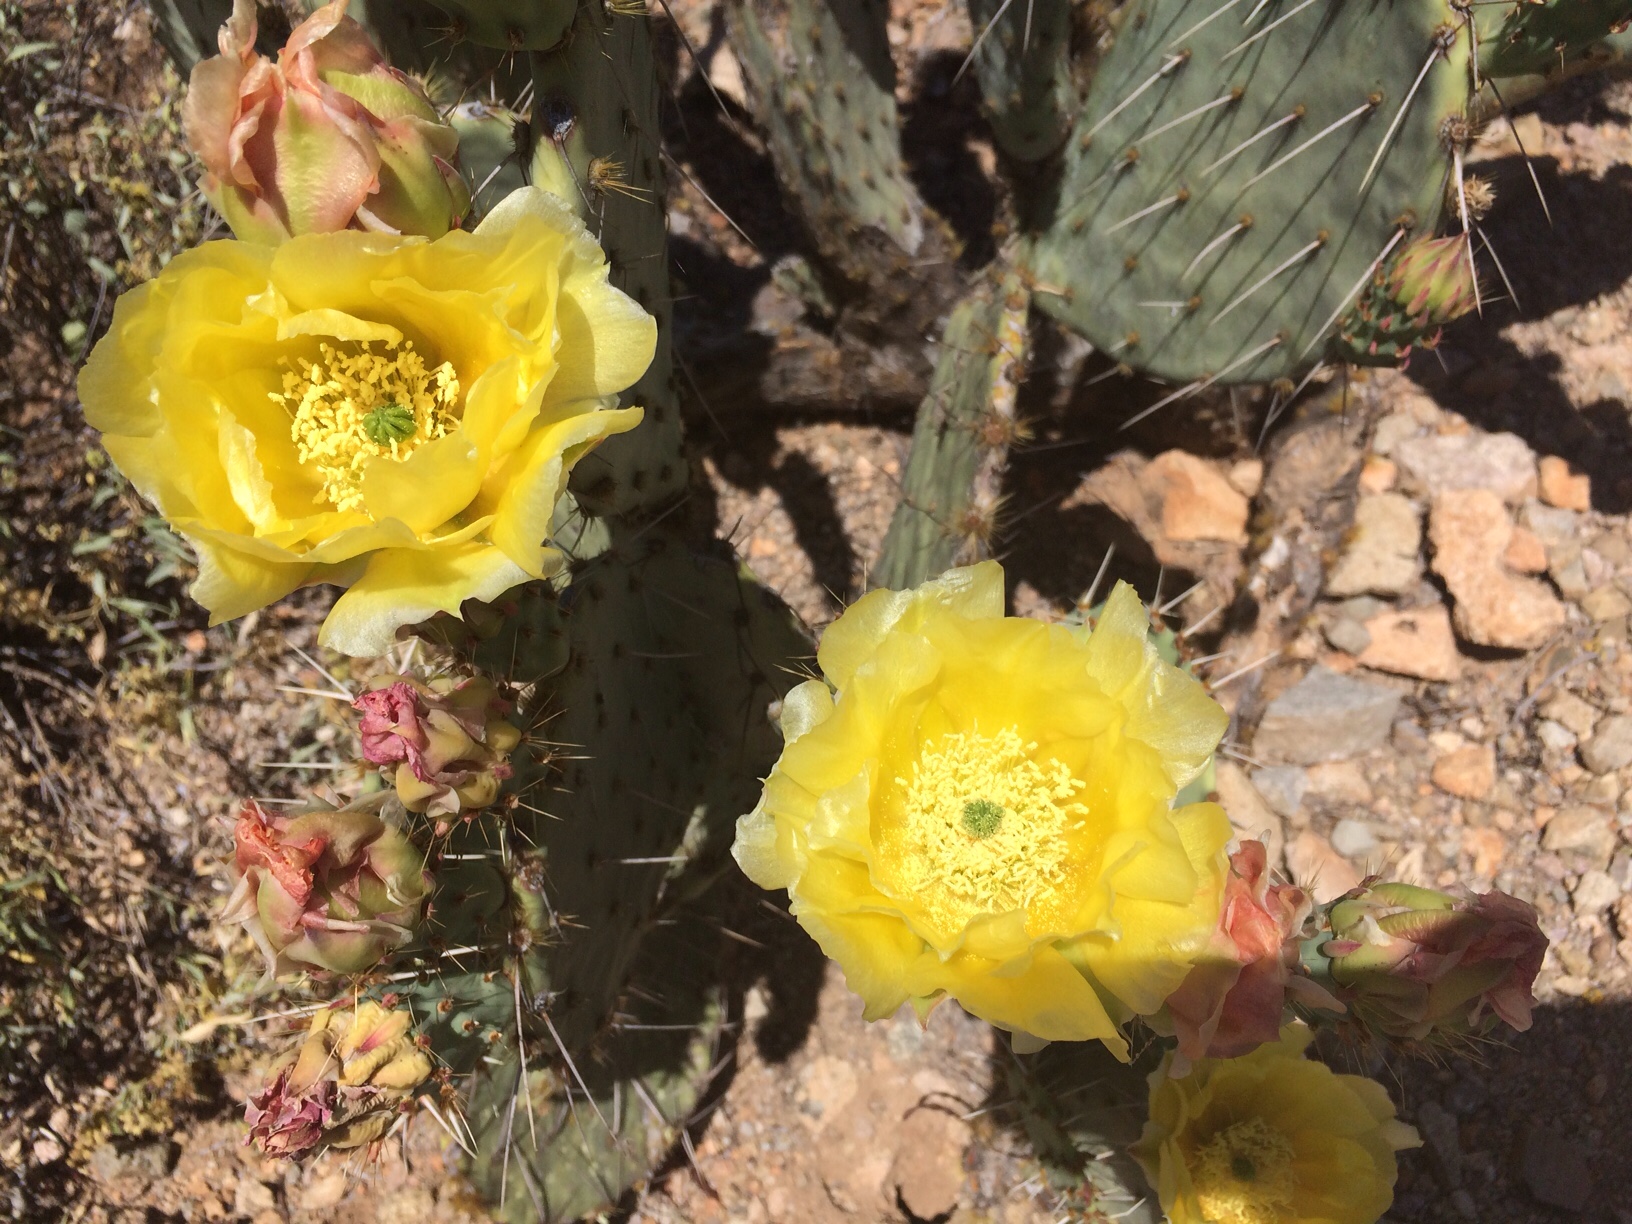 Prickly pear flowers